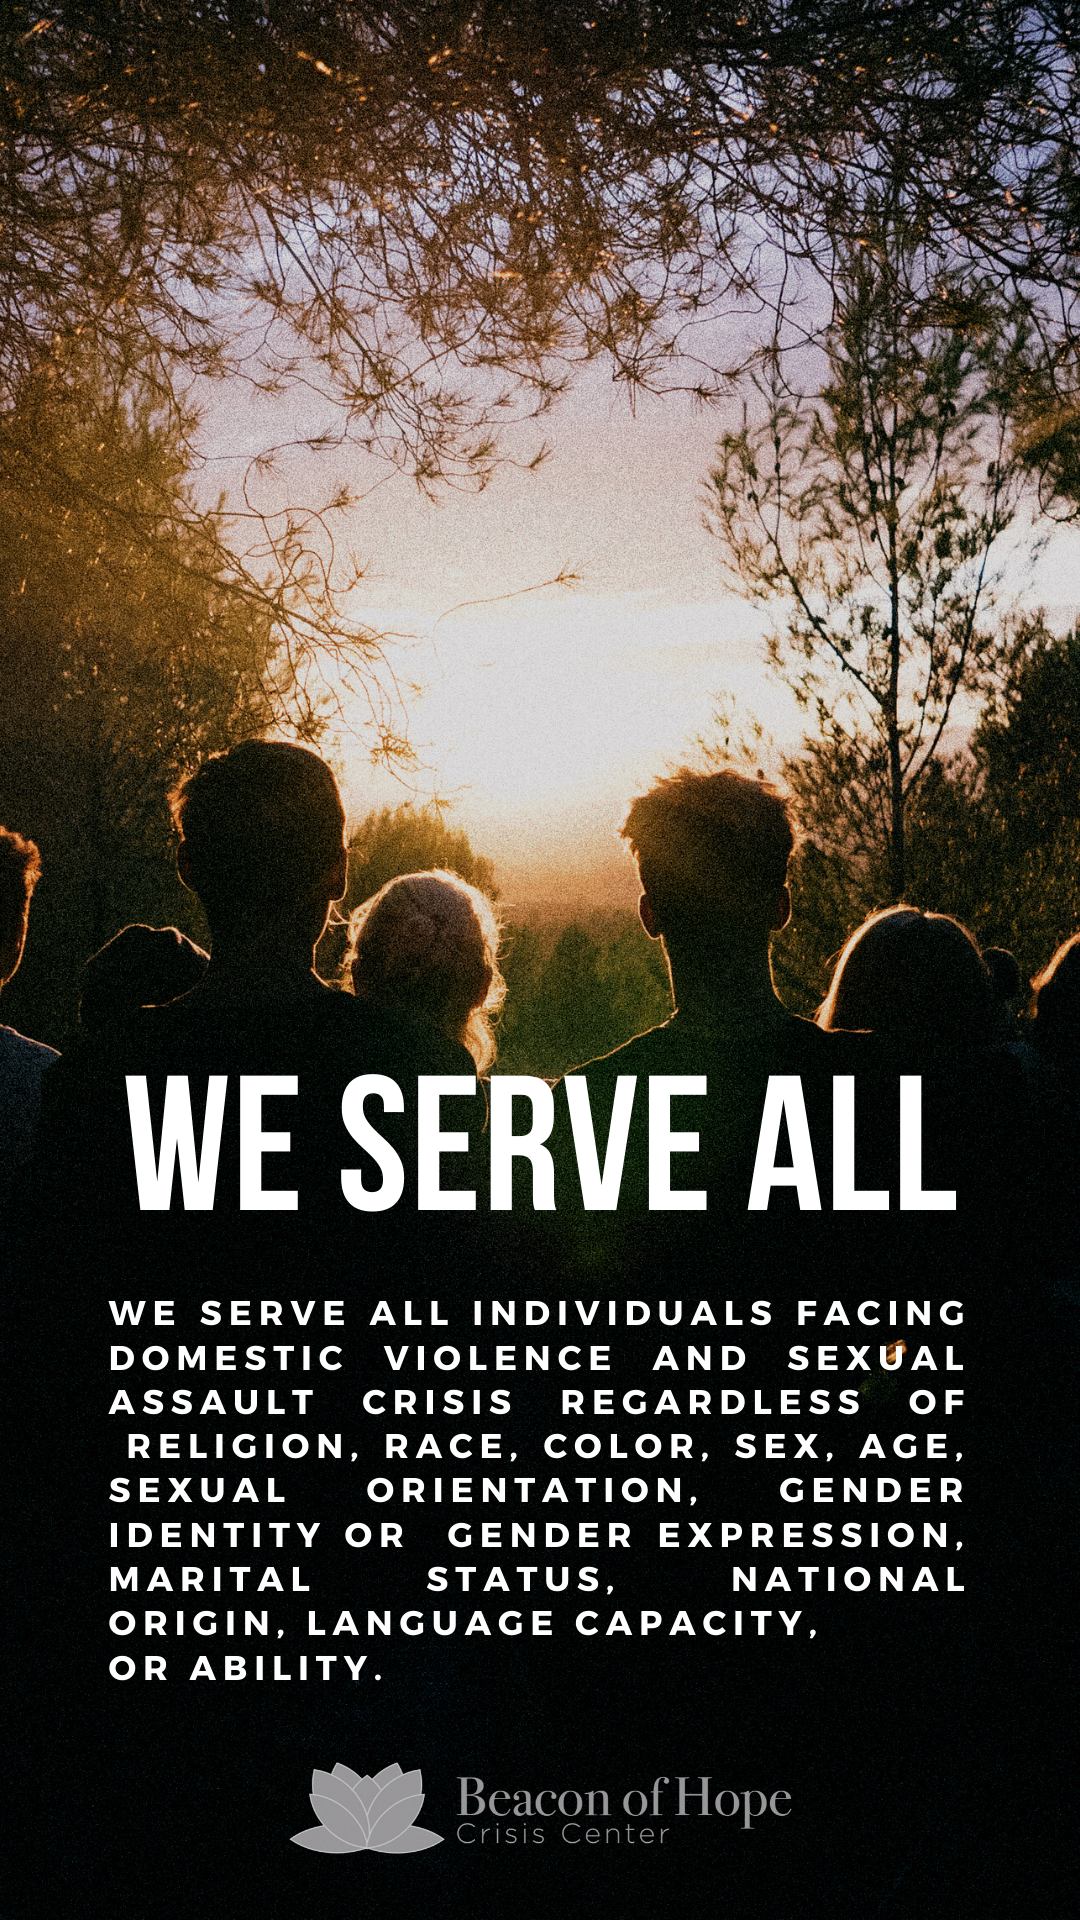 We serve all individuals facing domestic violence and sexual assault crisis regardless of religion, race, color, sex, age, sexual orientation, gender expression, marital status, national origin, language capacity, or ability